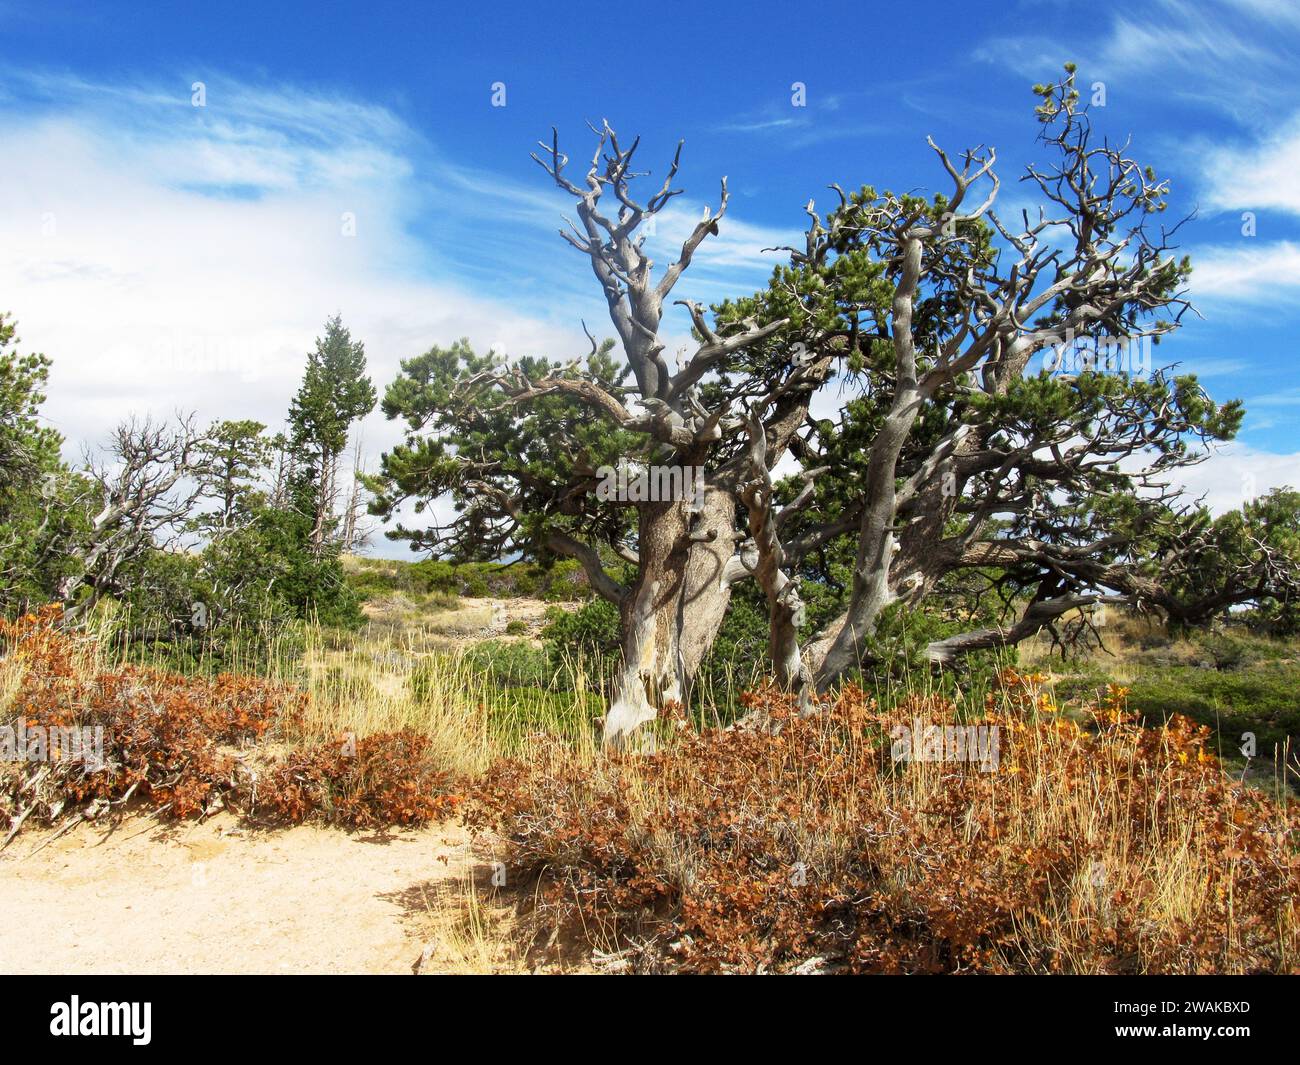 A stout Bristlecone Pine growing along the edge of the Paunsaugunt Plateau, in Bryce Canyon. Stock Photo